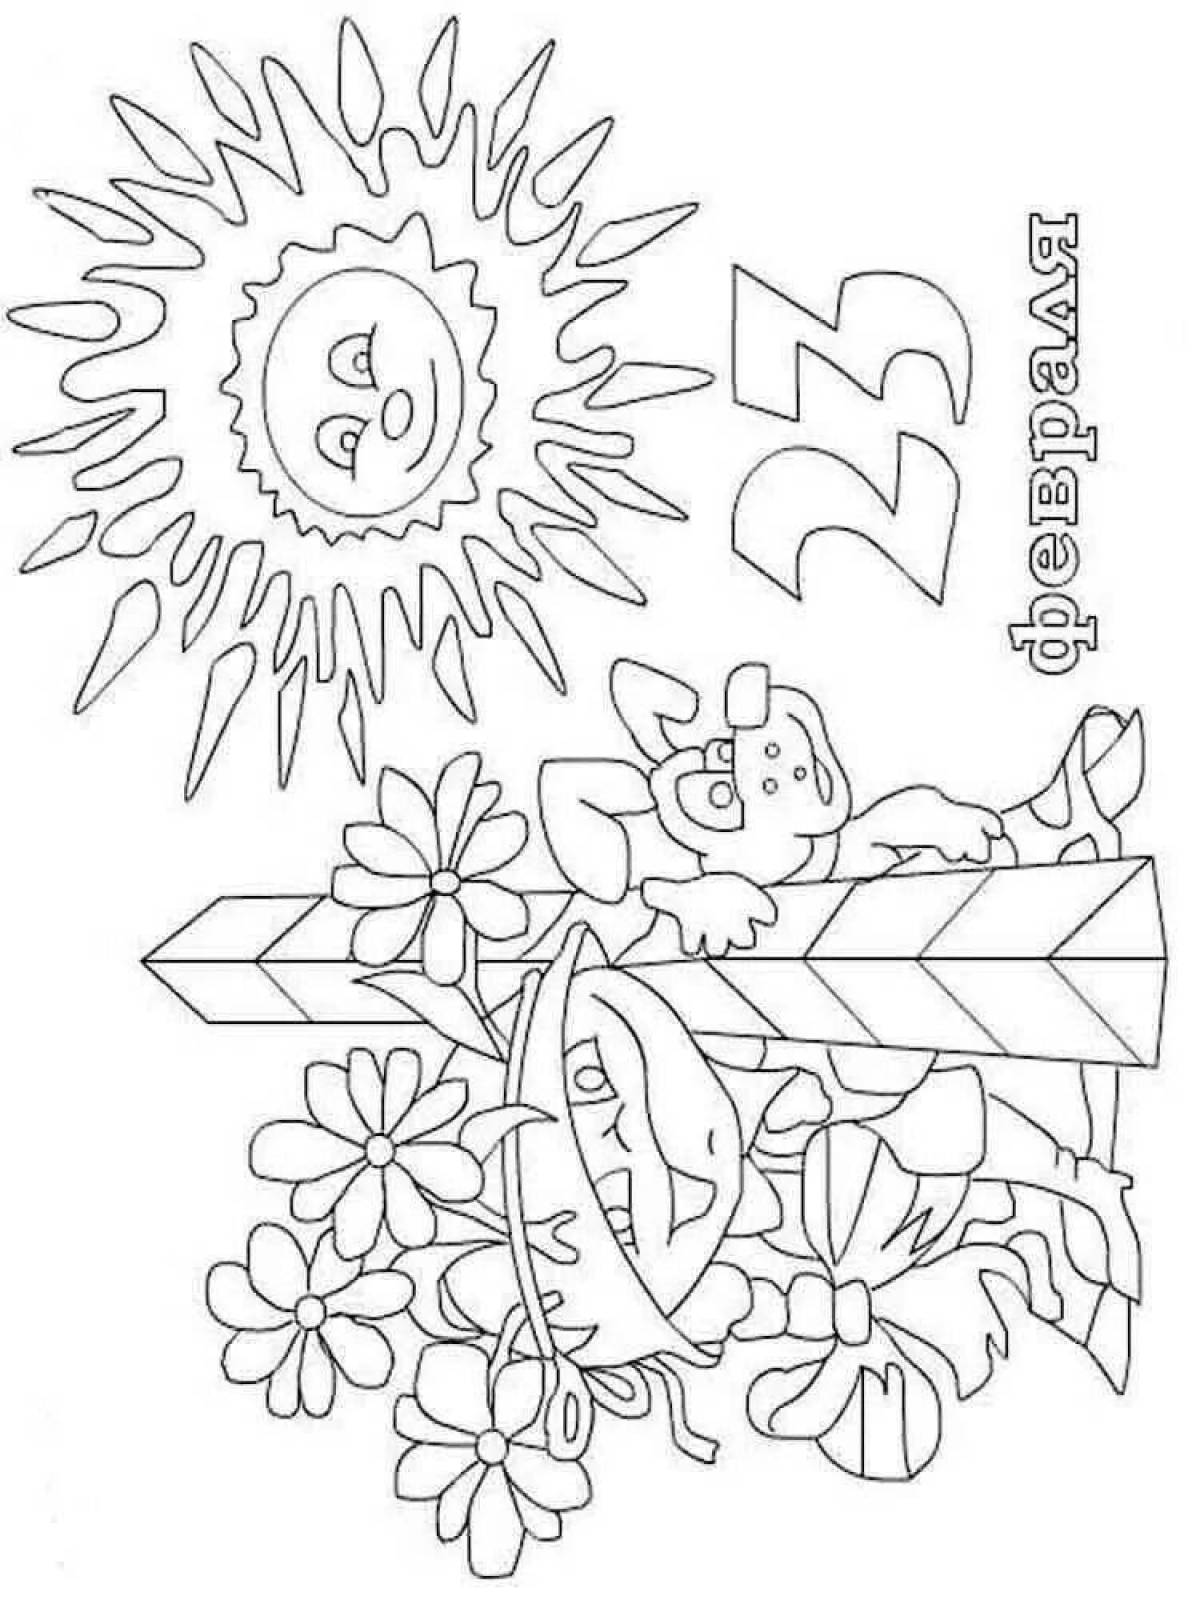 Coloring page energetic school February 23